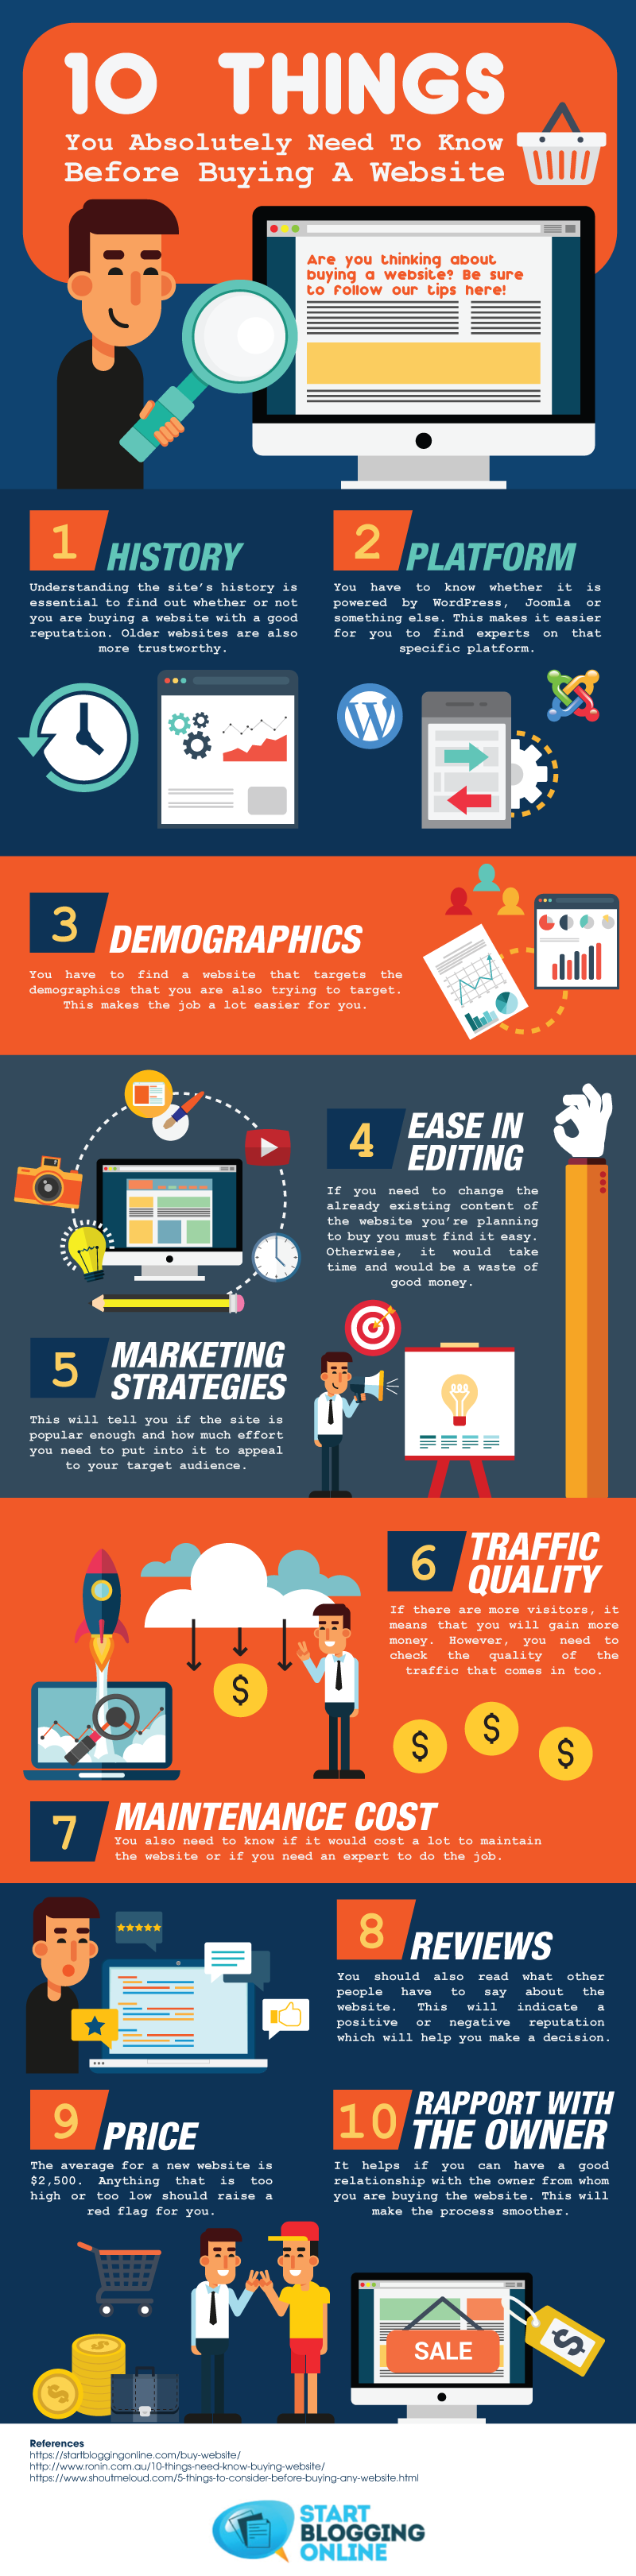 Buying a Website: 10 Things You Need to Know - #Infographic